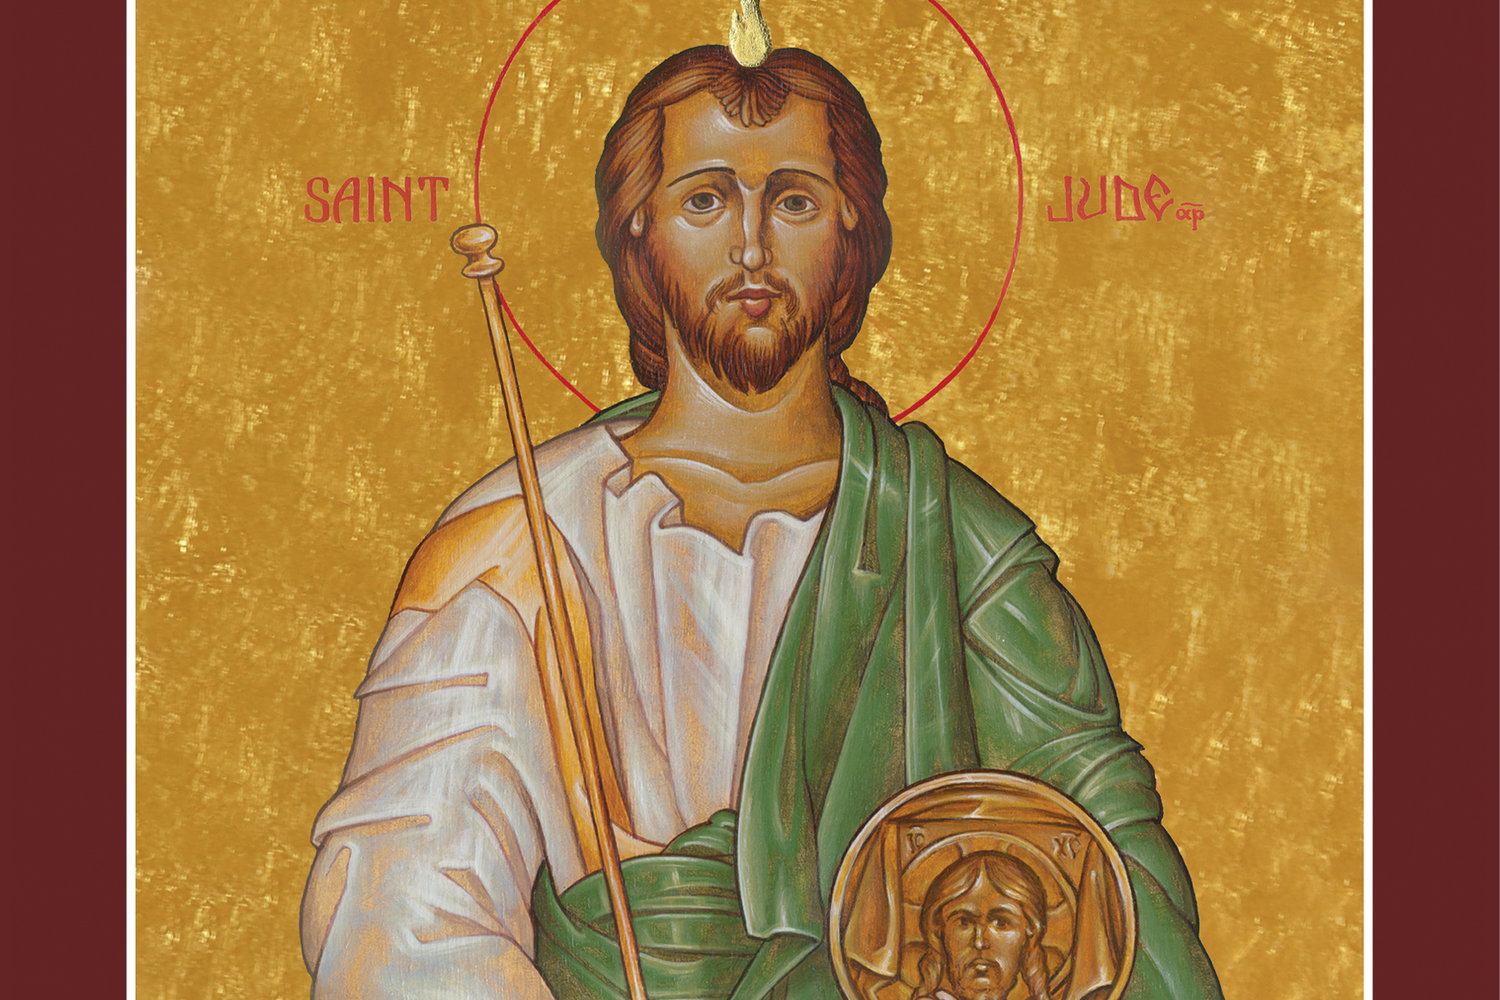 March 14 Day of Prayer for Vocations to highlight St. Jude the Apostle. The Catholic Missourian